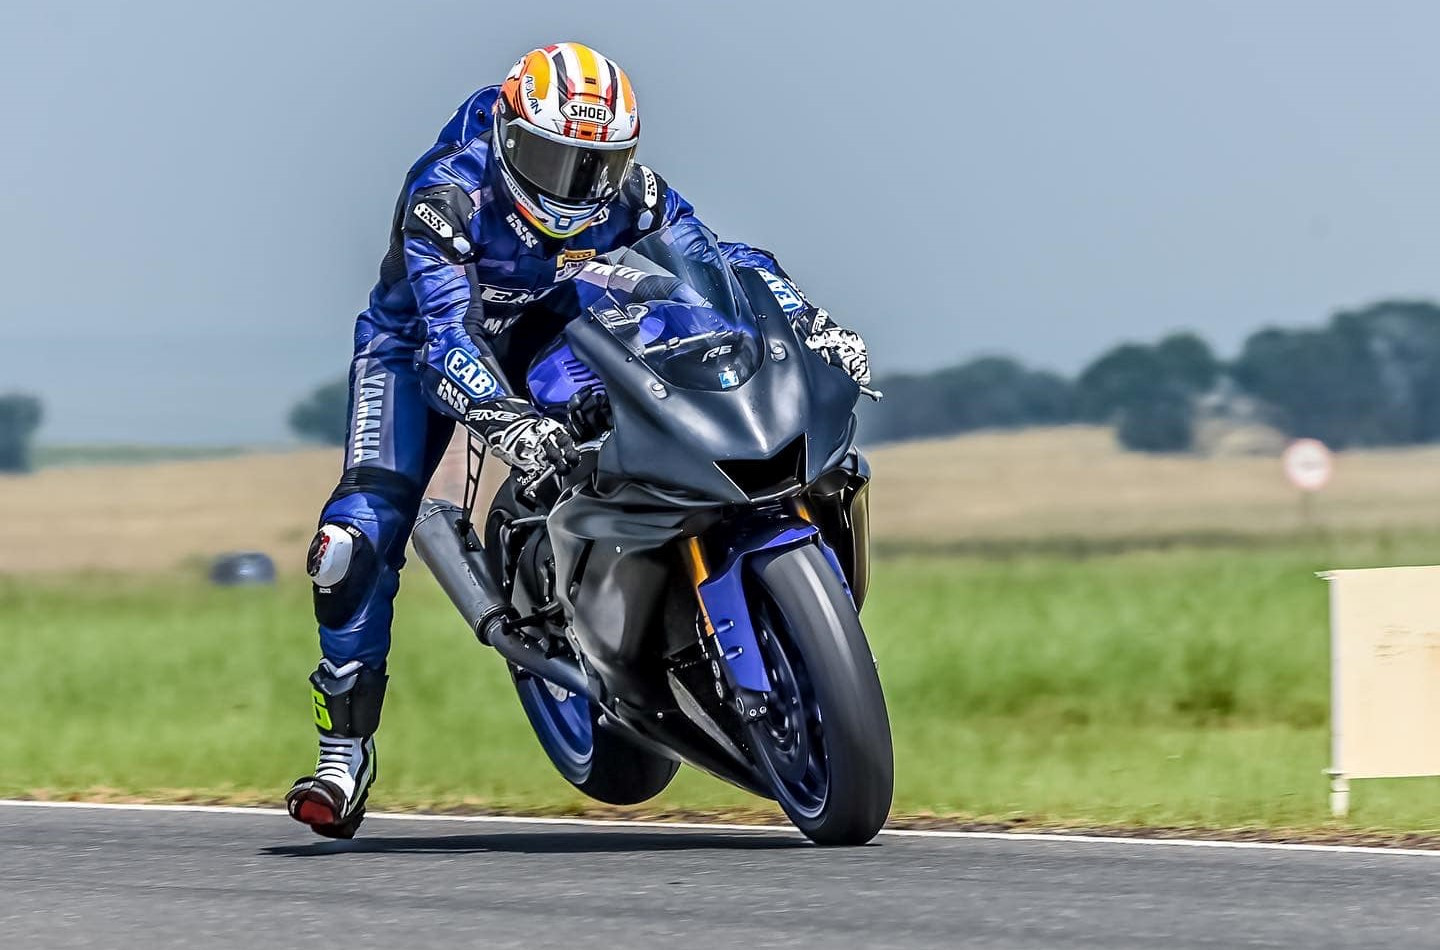 Steven Odendaal training on his personal Yamaha YZF-R6. Photo courtesy Steven Odendaal.